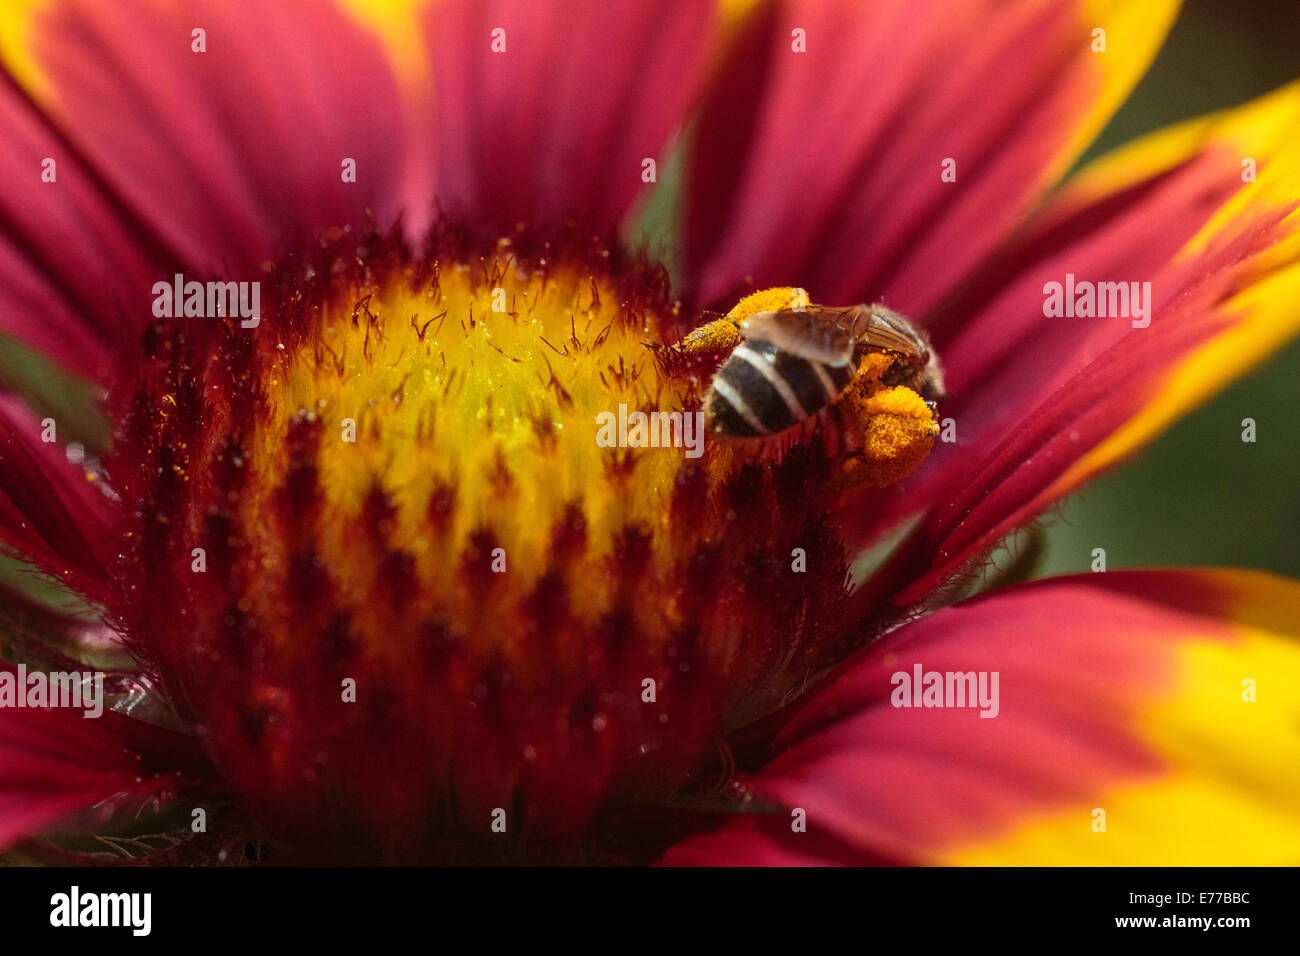 A baby bumblebee foraging on gaillardia in the sun with full pollen baskets. Stock Photo